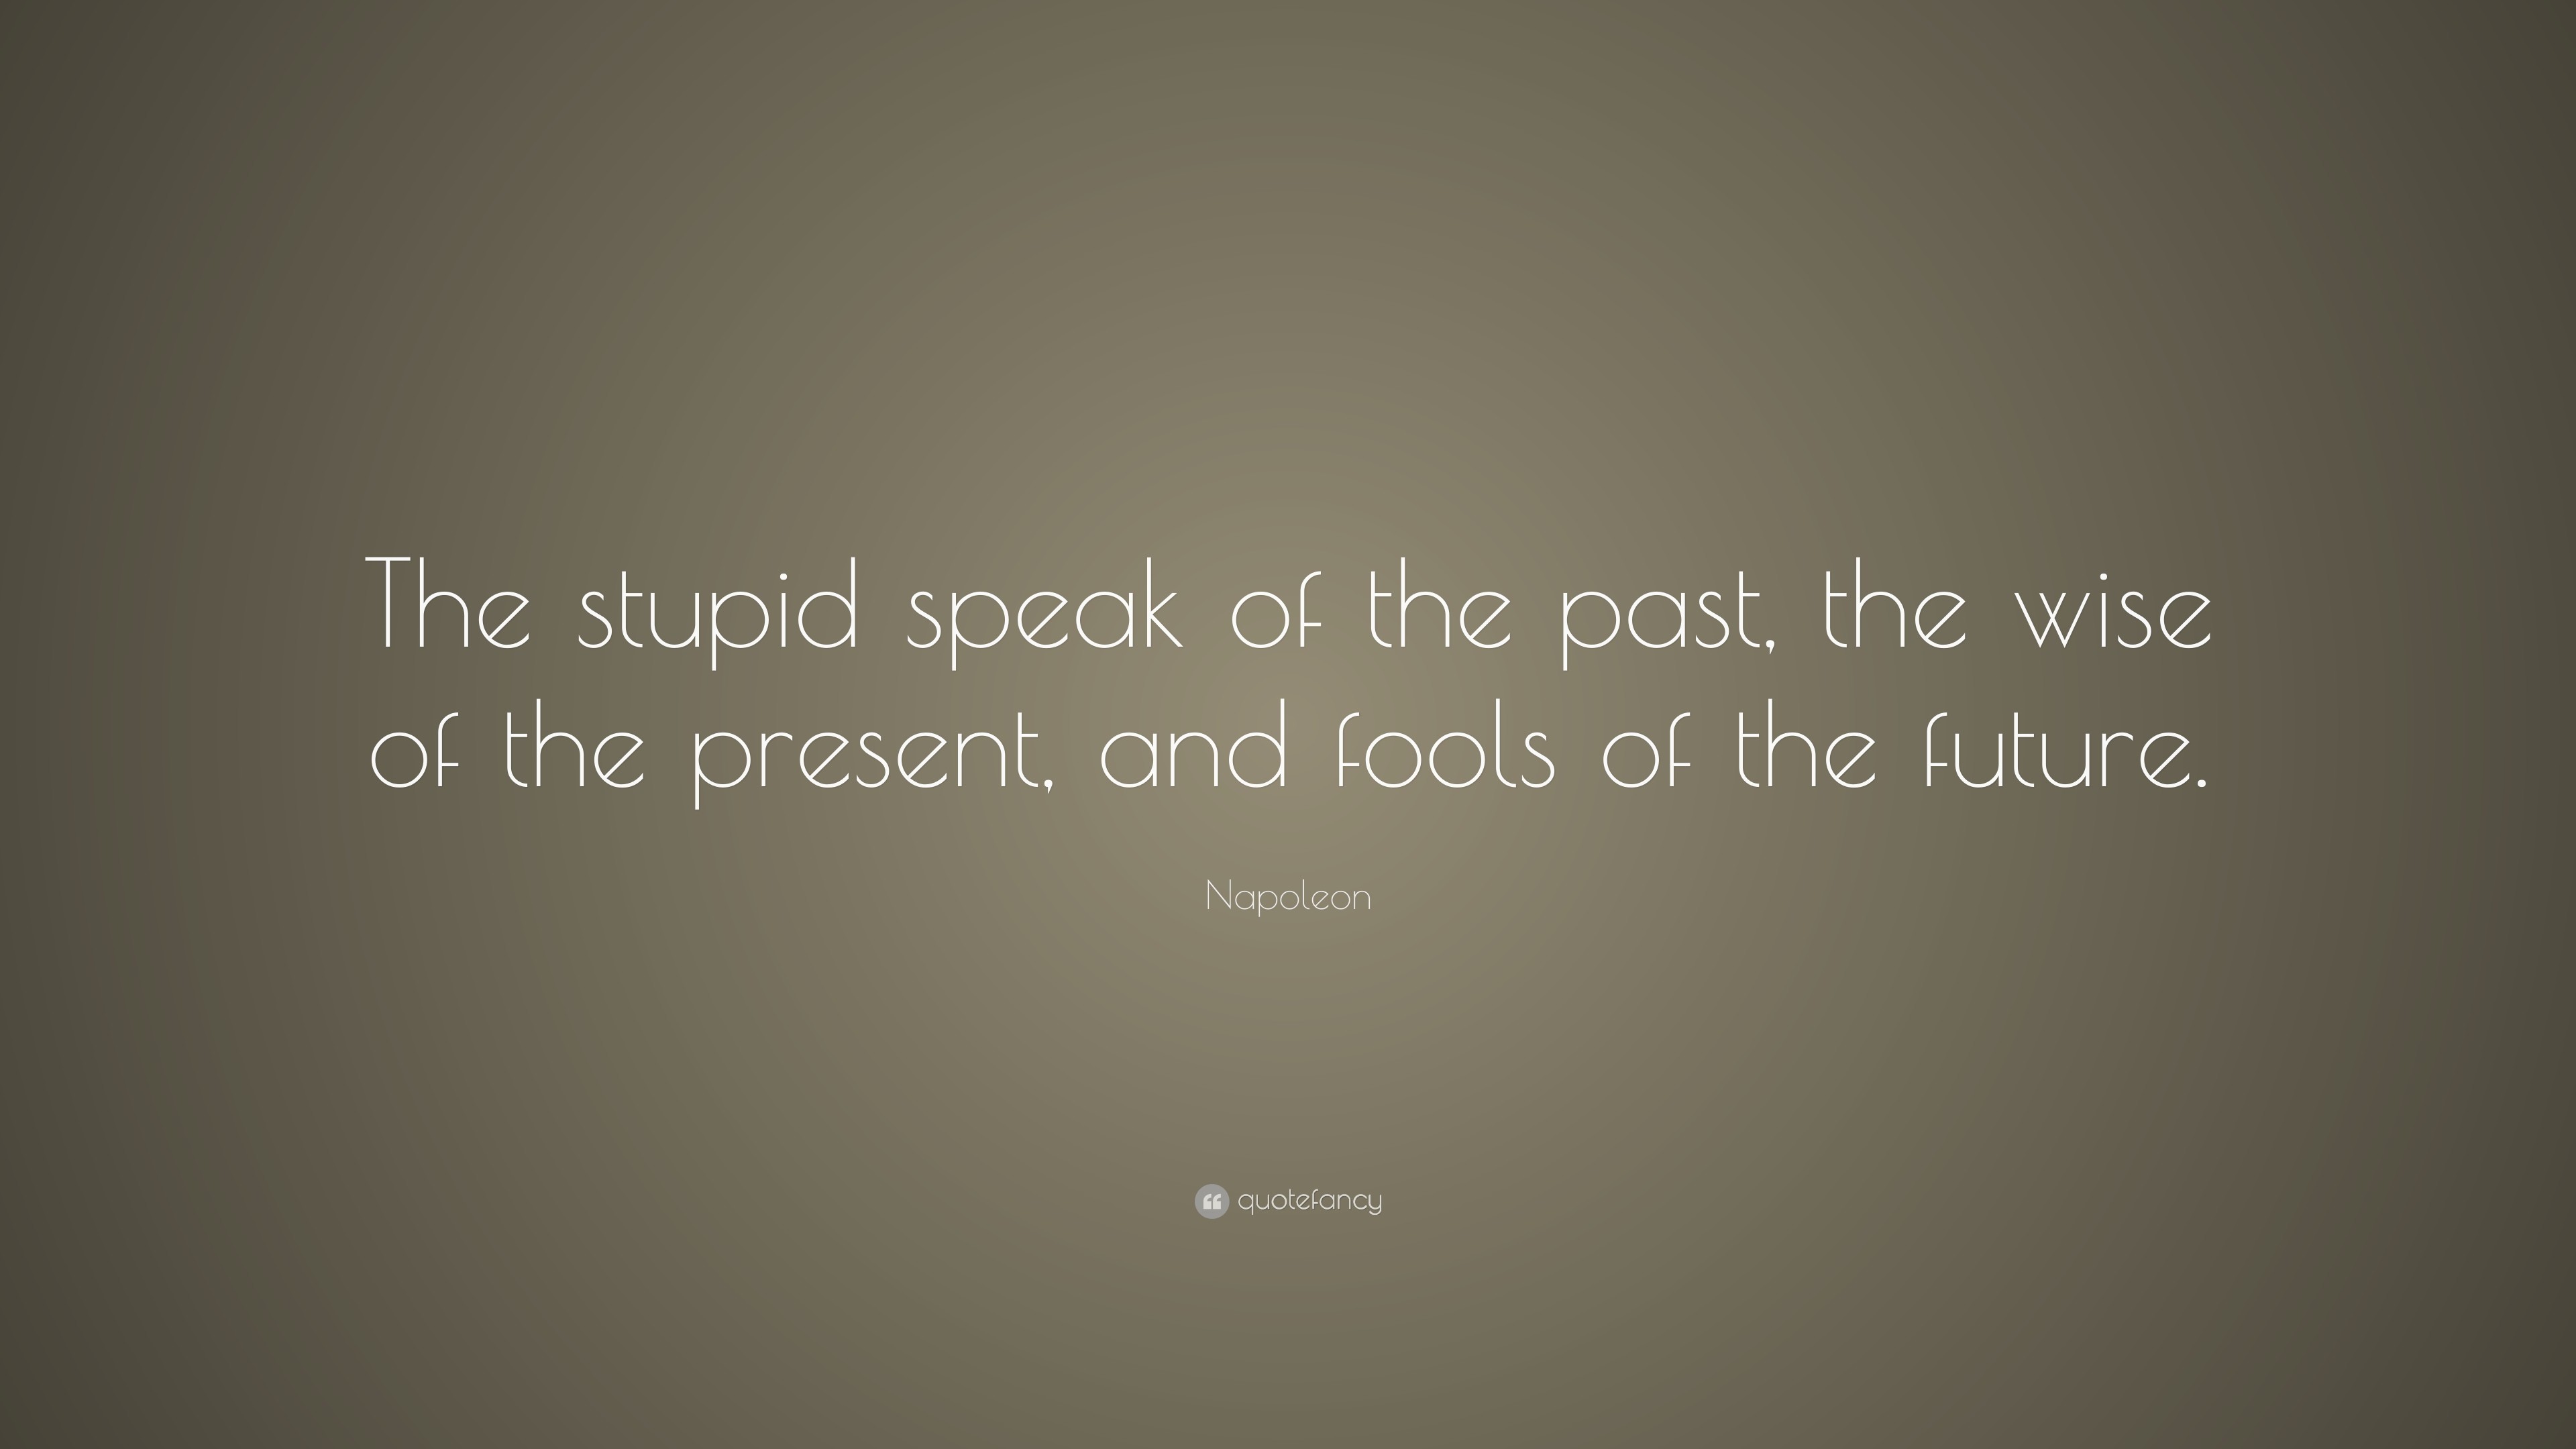 3840x2160 Napoleon Quote: “The stupid speak of the past, the wise of the present